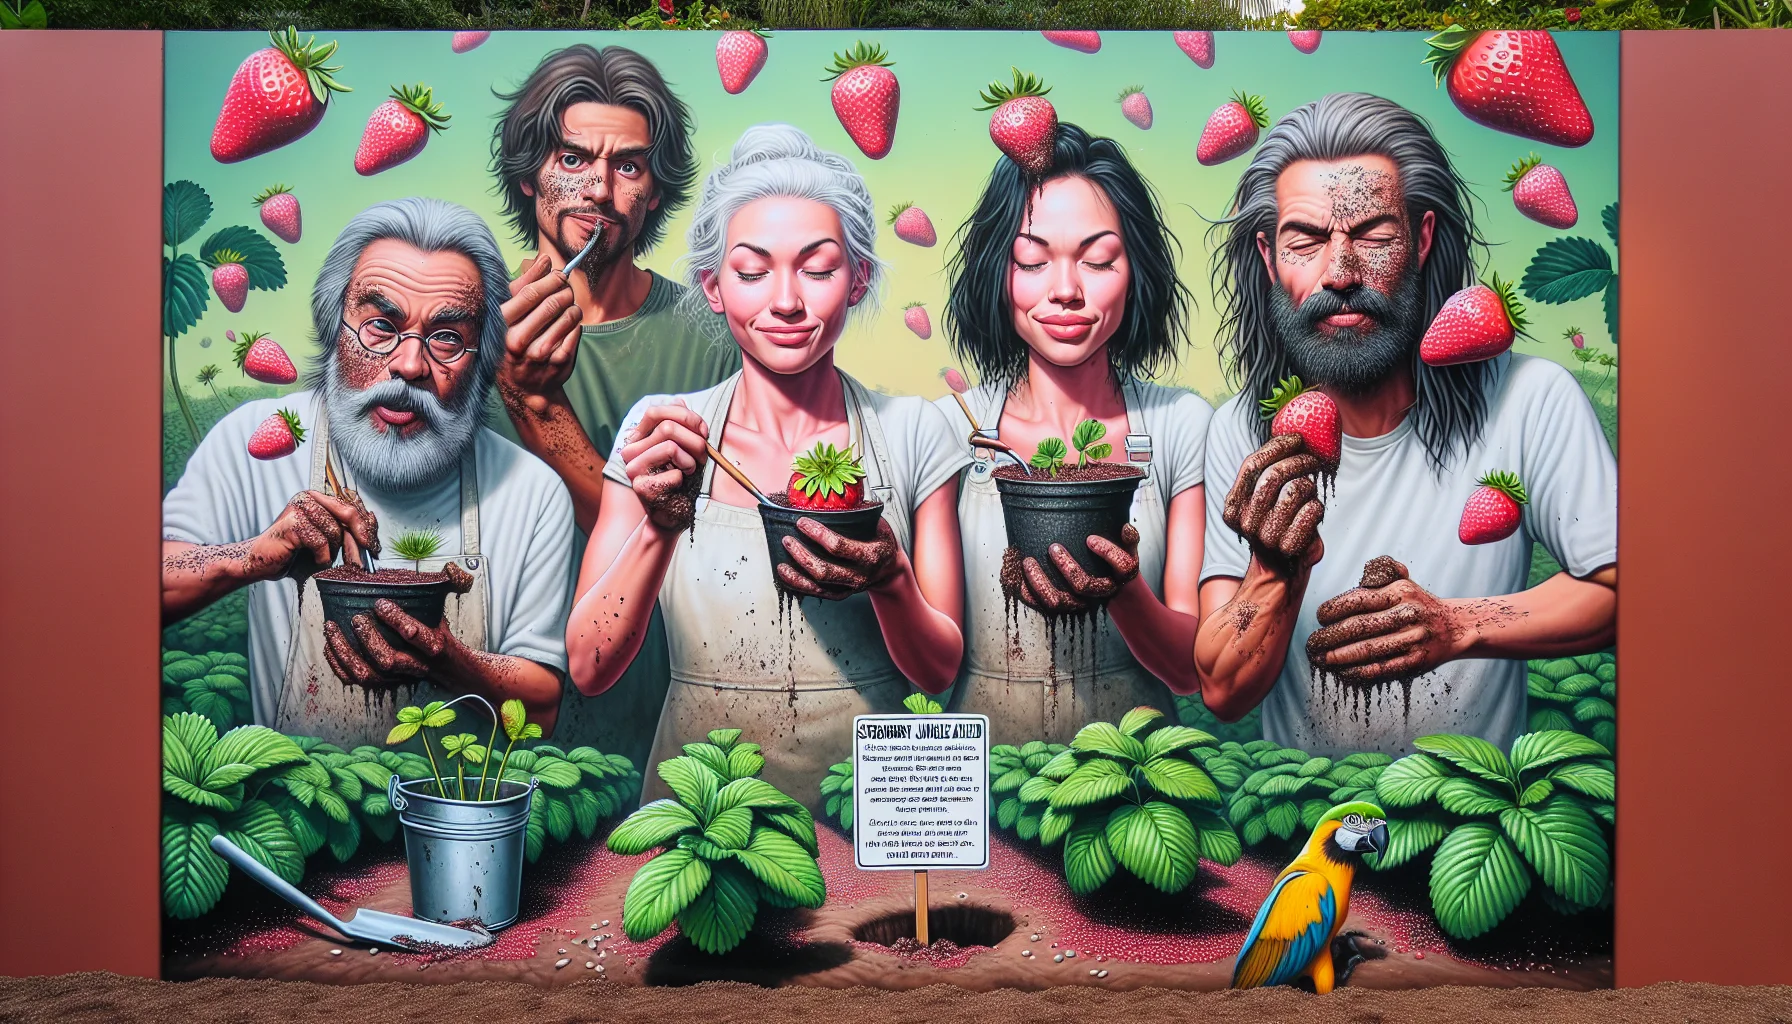 Envision a humorous, realistic image of gardening that encourages people to partake in the activity. The focal point centers white, black, and Hispanic individuals who are showing the process of growing strawberries from seeds. They have dirt smudges on their faces, their hair is adorned with strawberry leaves and their attire is sprinkled with seeds, indicating their deep immersion in the activity. A parrot nearby, trying to poke at a strawberry plant with its beak, adds a whimsical touch. A sign on the corner of the garden reads 'Strawberry Jungle Ahead: Enter At Your Own Sweet Risk'.